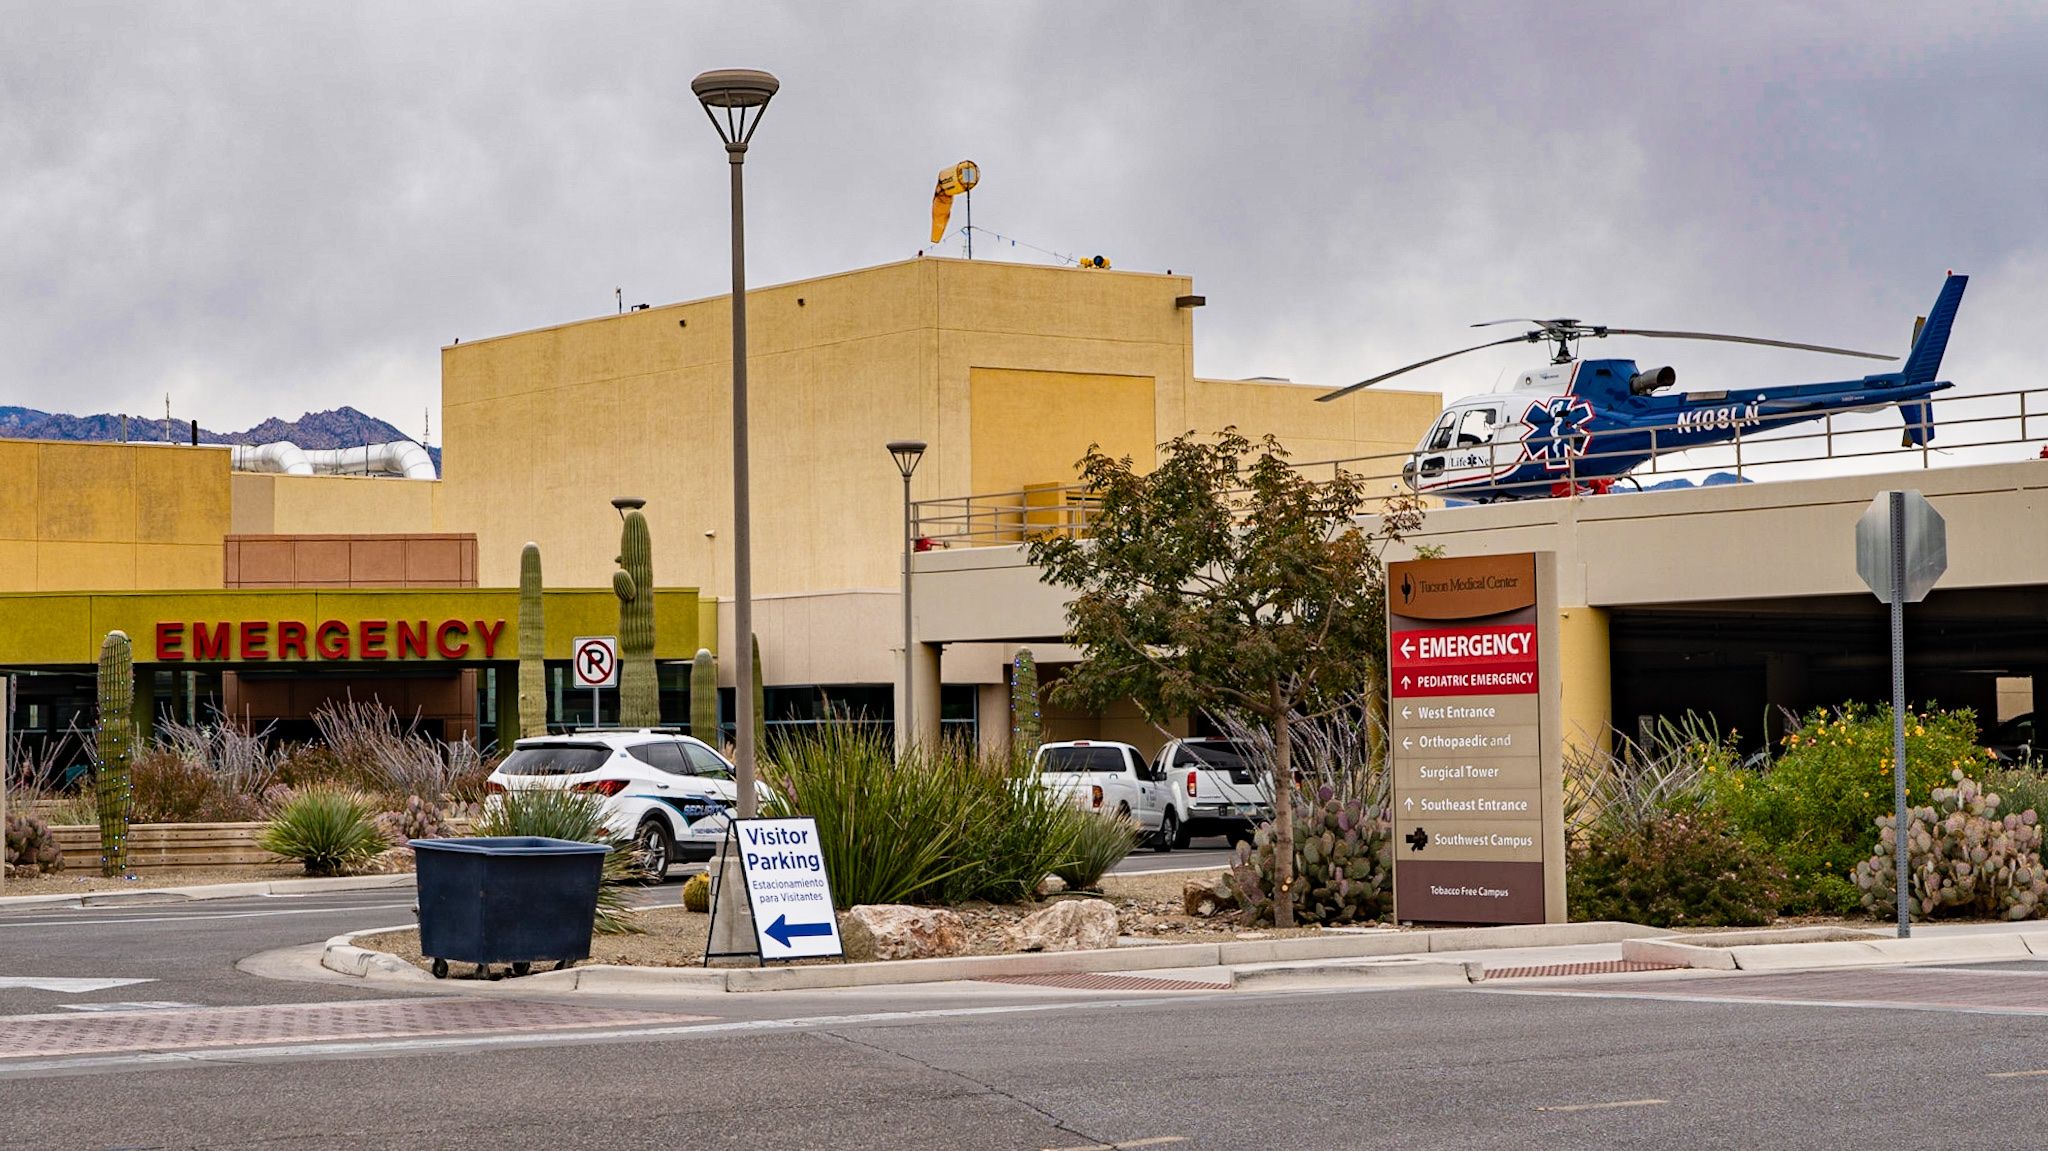 Hospital Emergency Room Entrance with Helicopter Pad